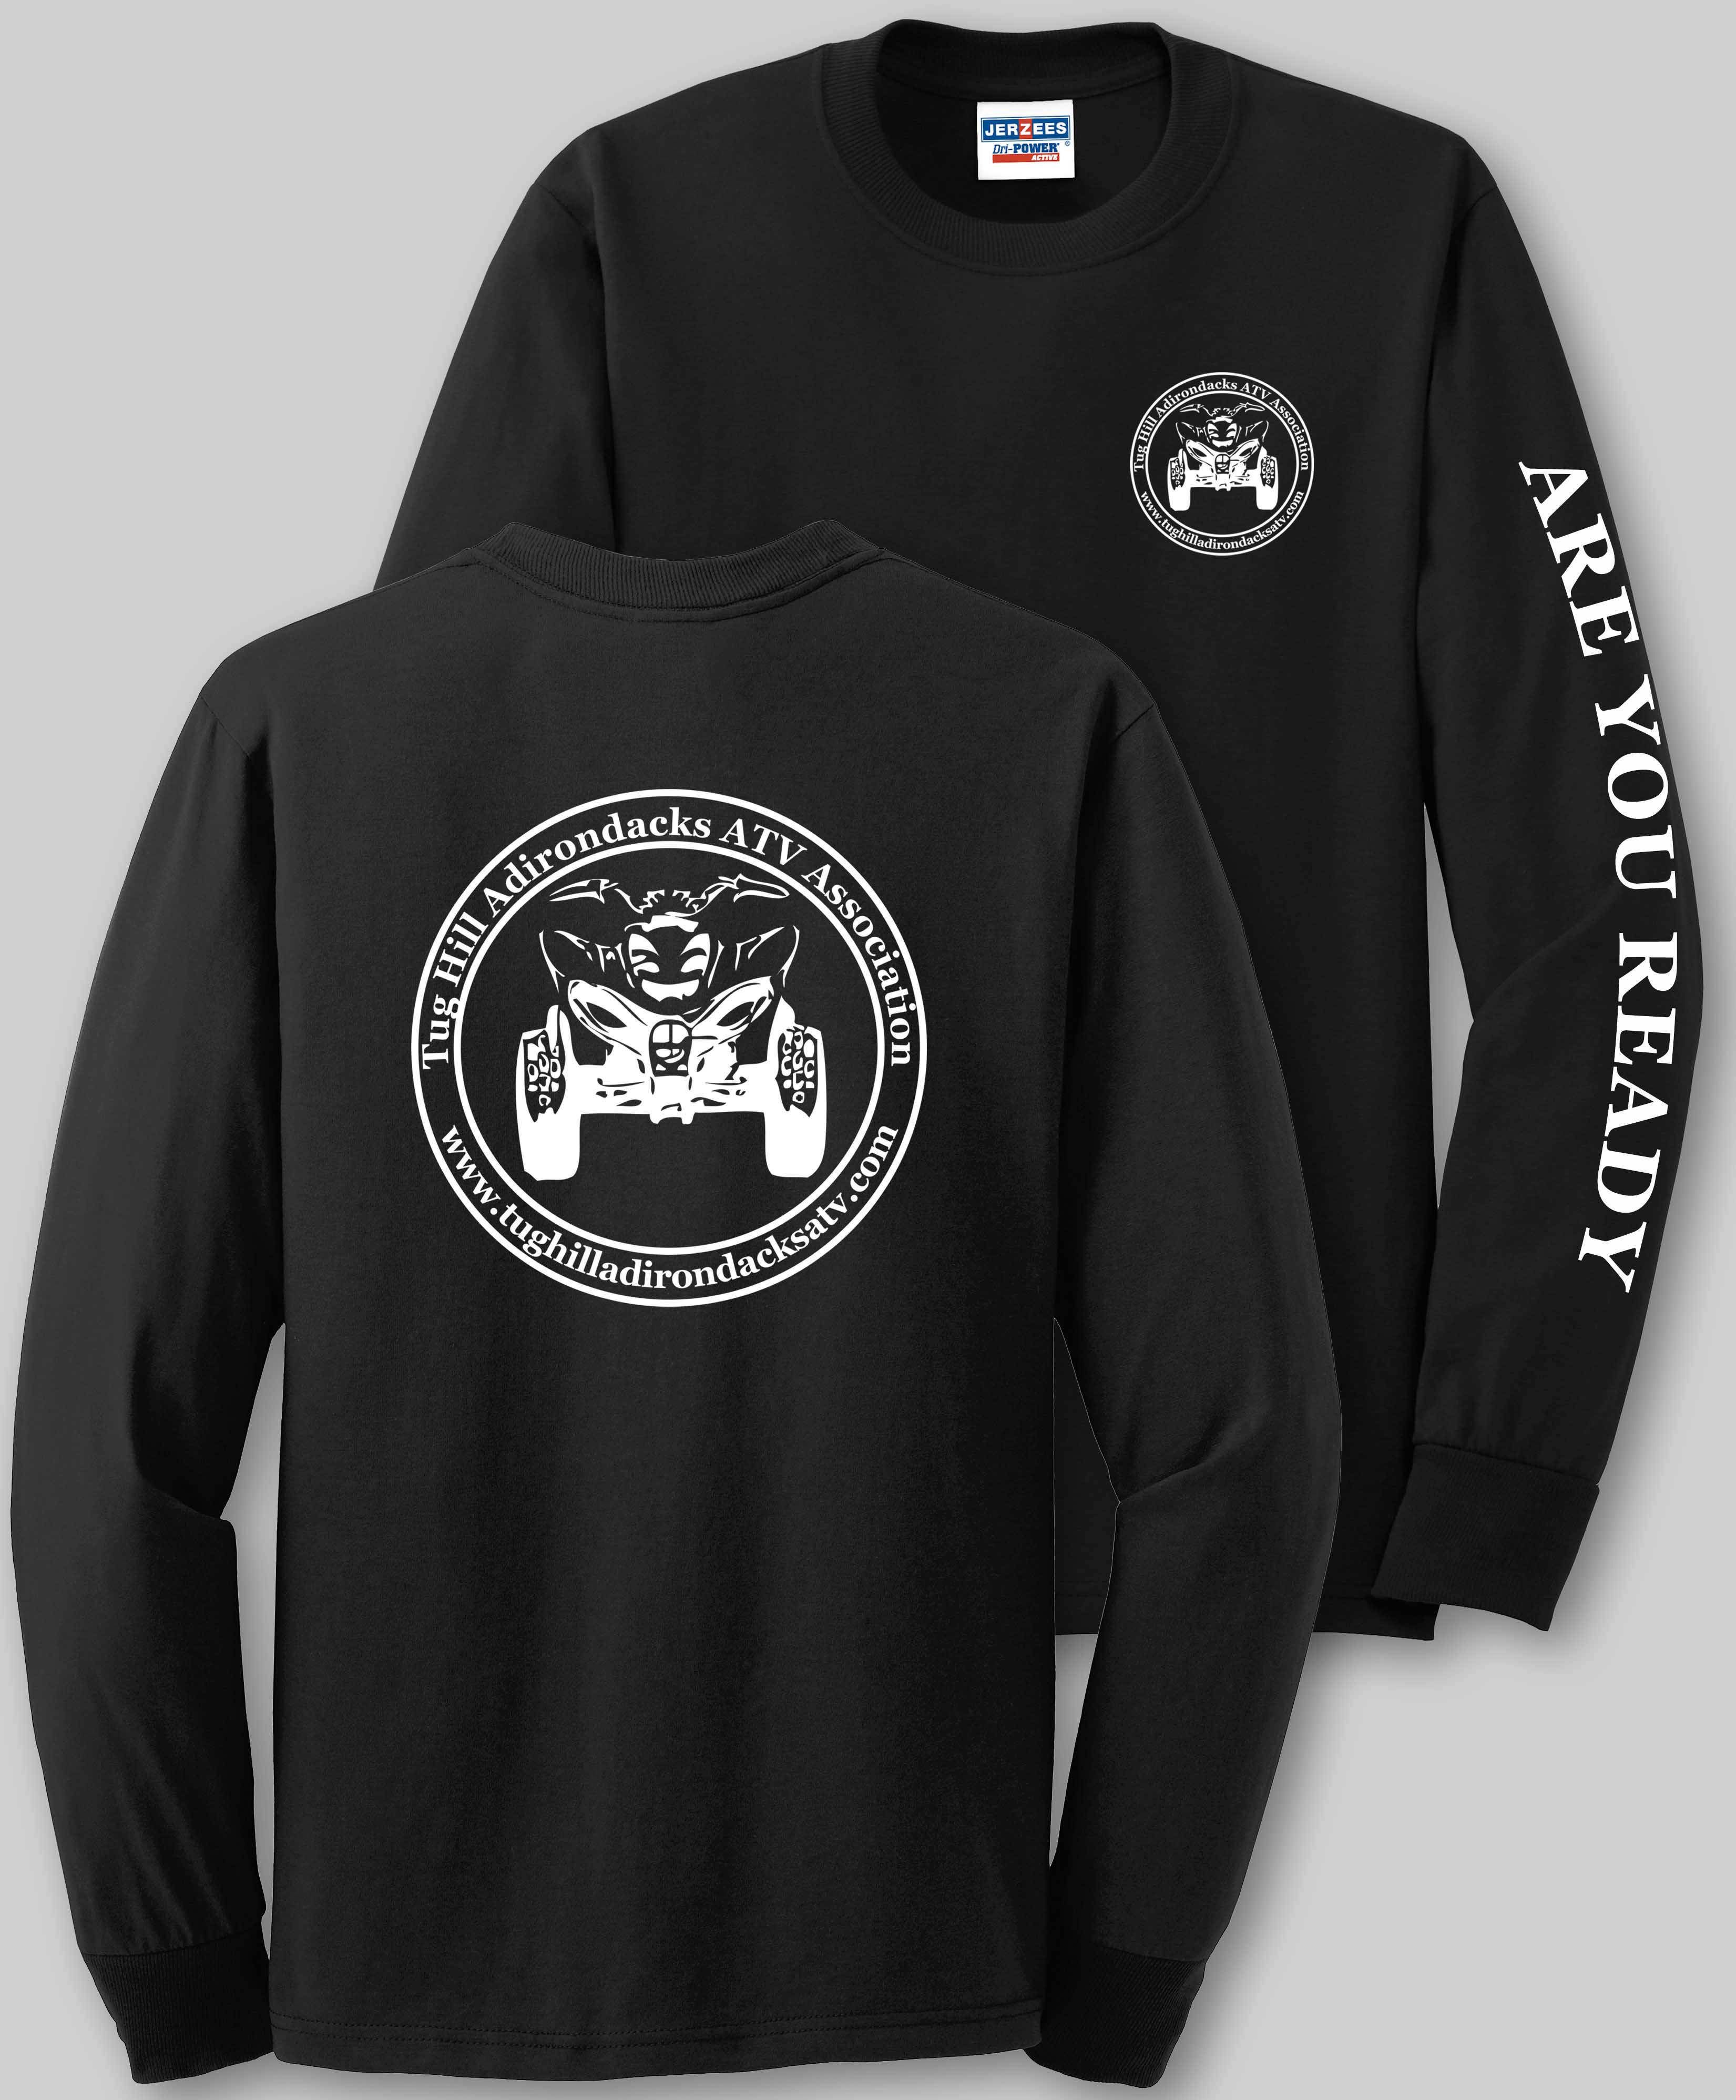 A New Limited Edition Long Sleeve Tee!